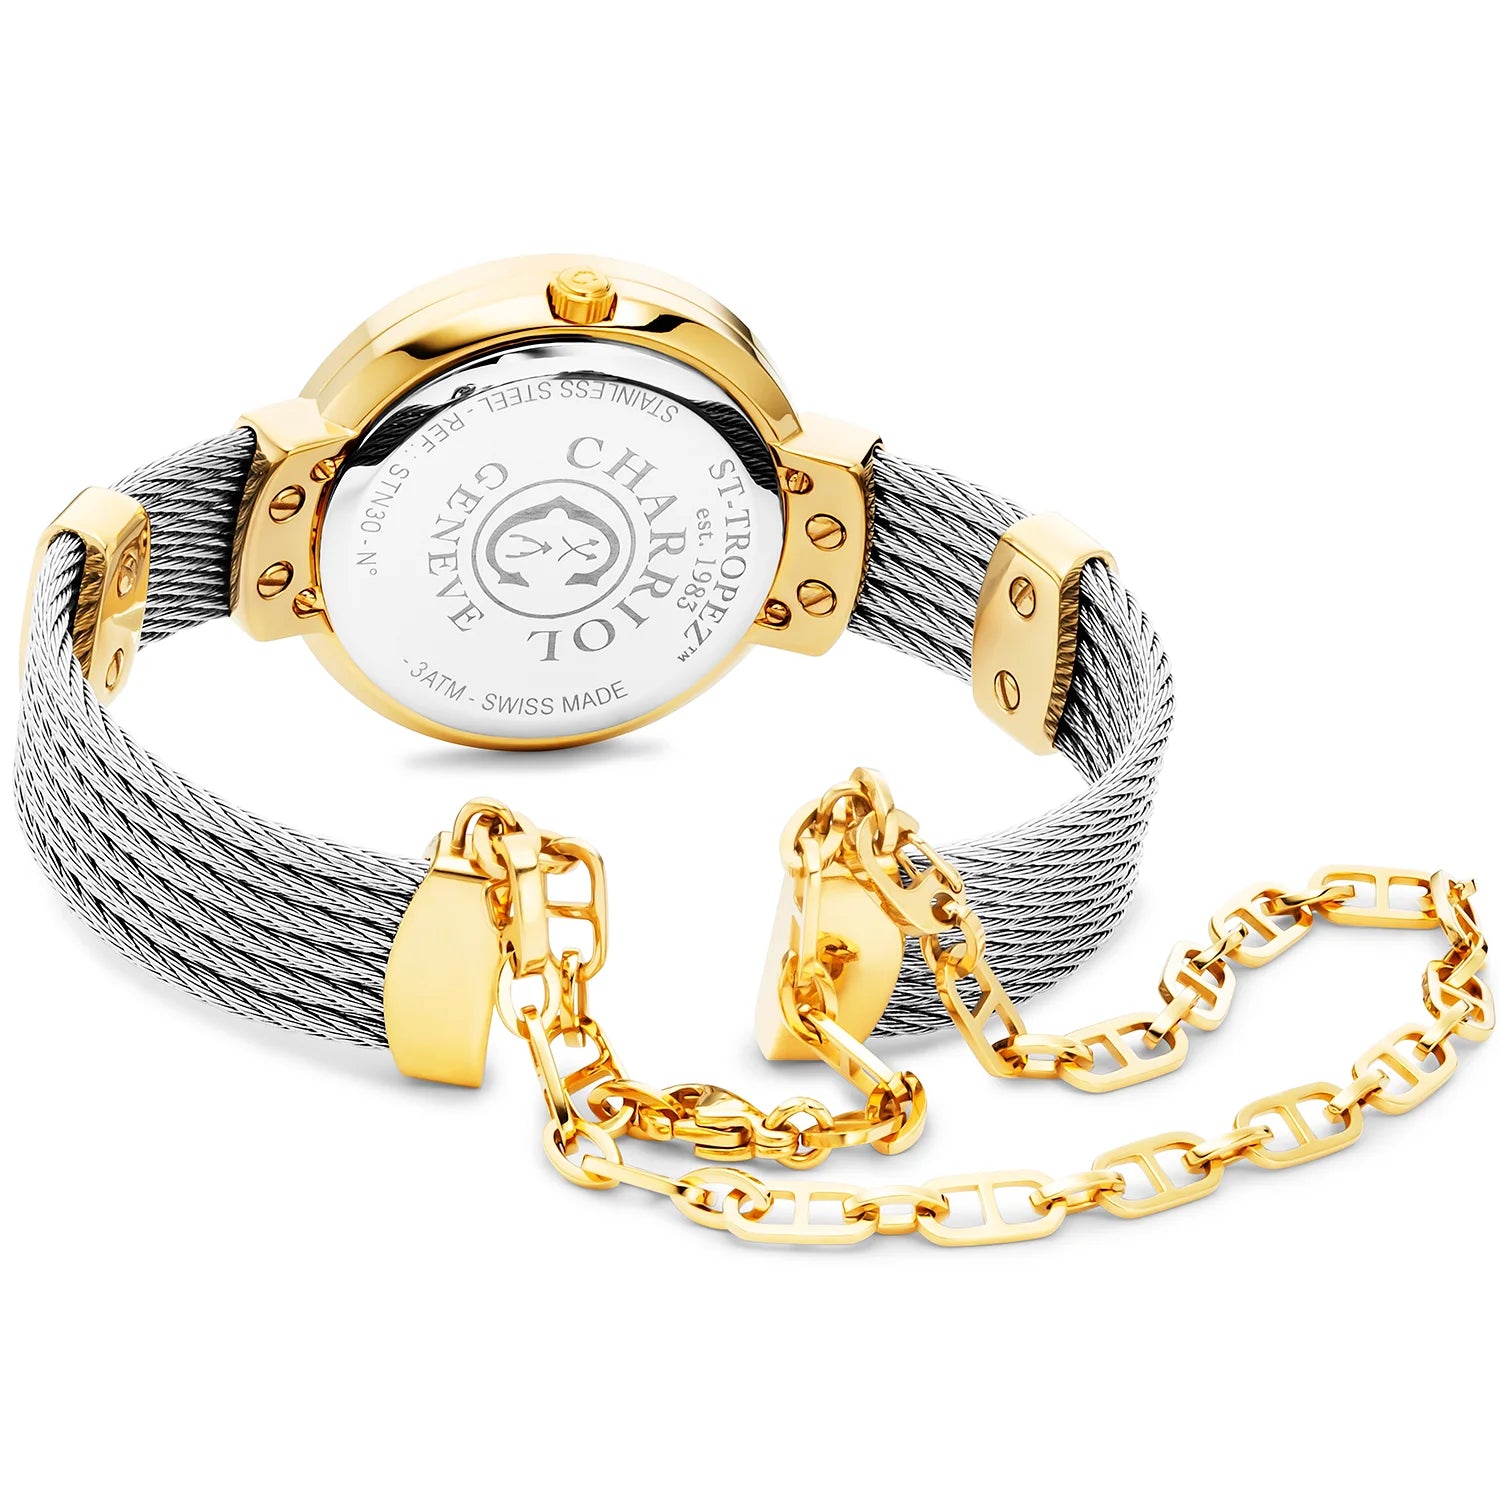 ST TROPEZ, 30MM, QUARTZ CALIBRE, MOTHER-OF-PEARL DIAL, YELLOW GOLD PVD WITH 6 SCREWS BEZEL, STEEL CABLE BRACELET - Charriol Geneve -  Watch